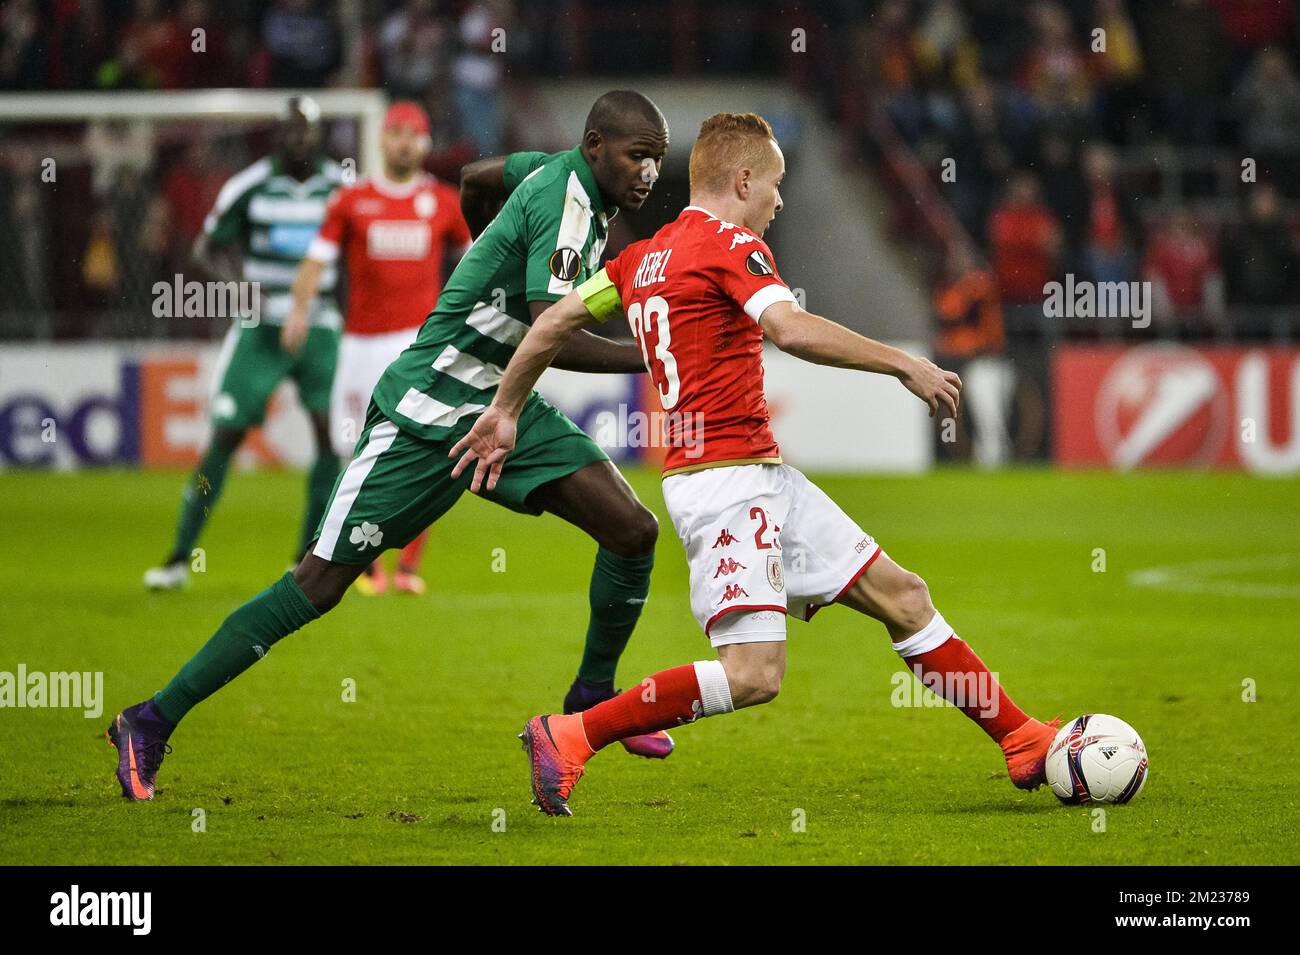 Panathinaikos' forward Victor Ibarbo and Standard's Adrien Trebel pictured during a third game of the group stage (group G) of the Europa League competition between Belgian soccer team Standard de Liege and Greek soccer team Panathinaikos, Thursday 20 October 2016, in Liege. BELGA PHOTO NICOLAS LAMBERT Stock Photo